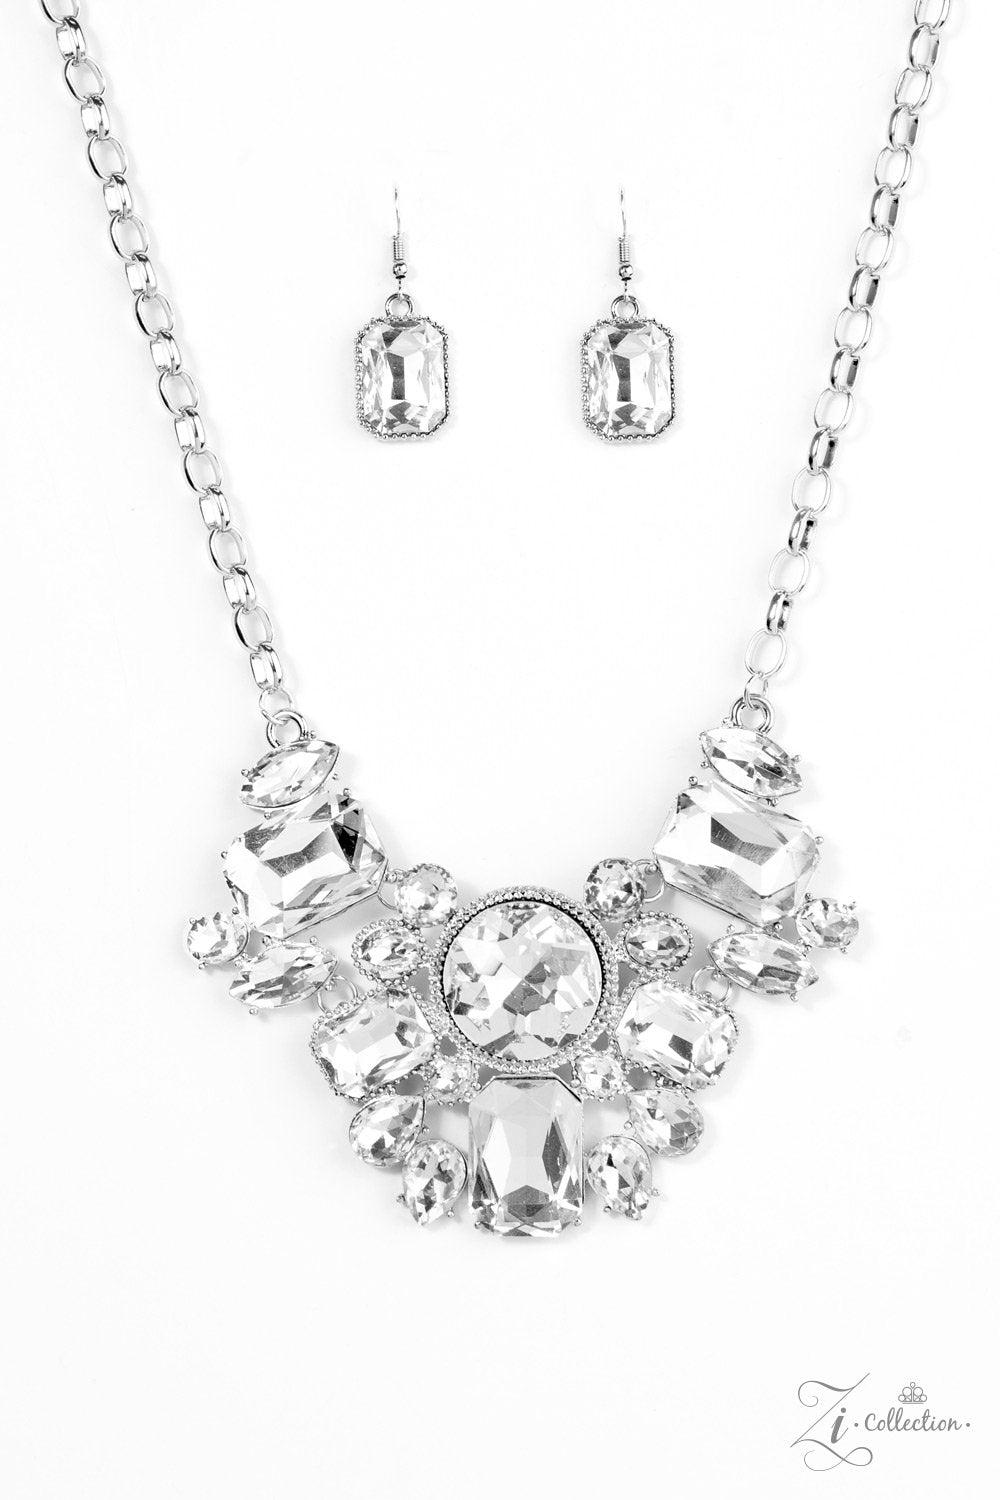 The Danielle - Zi Collection - Paparazzi necklace – JewelryBlingThing